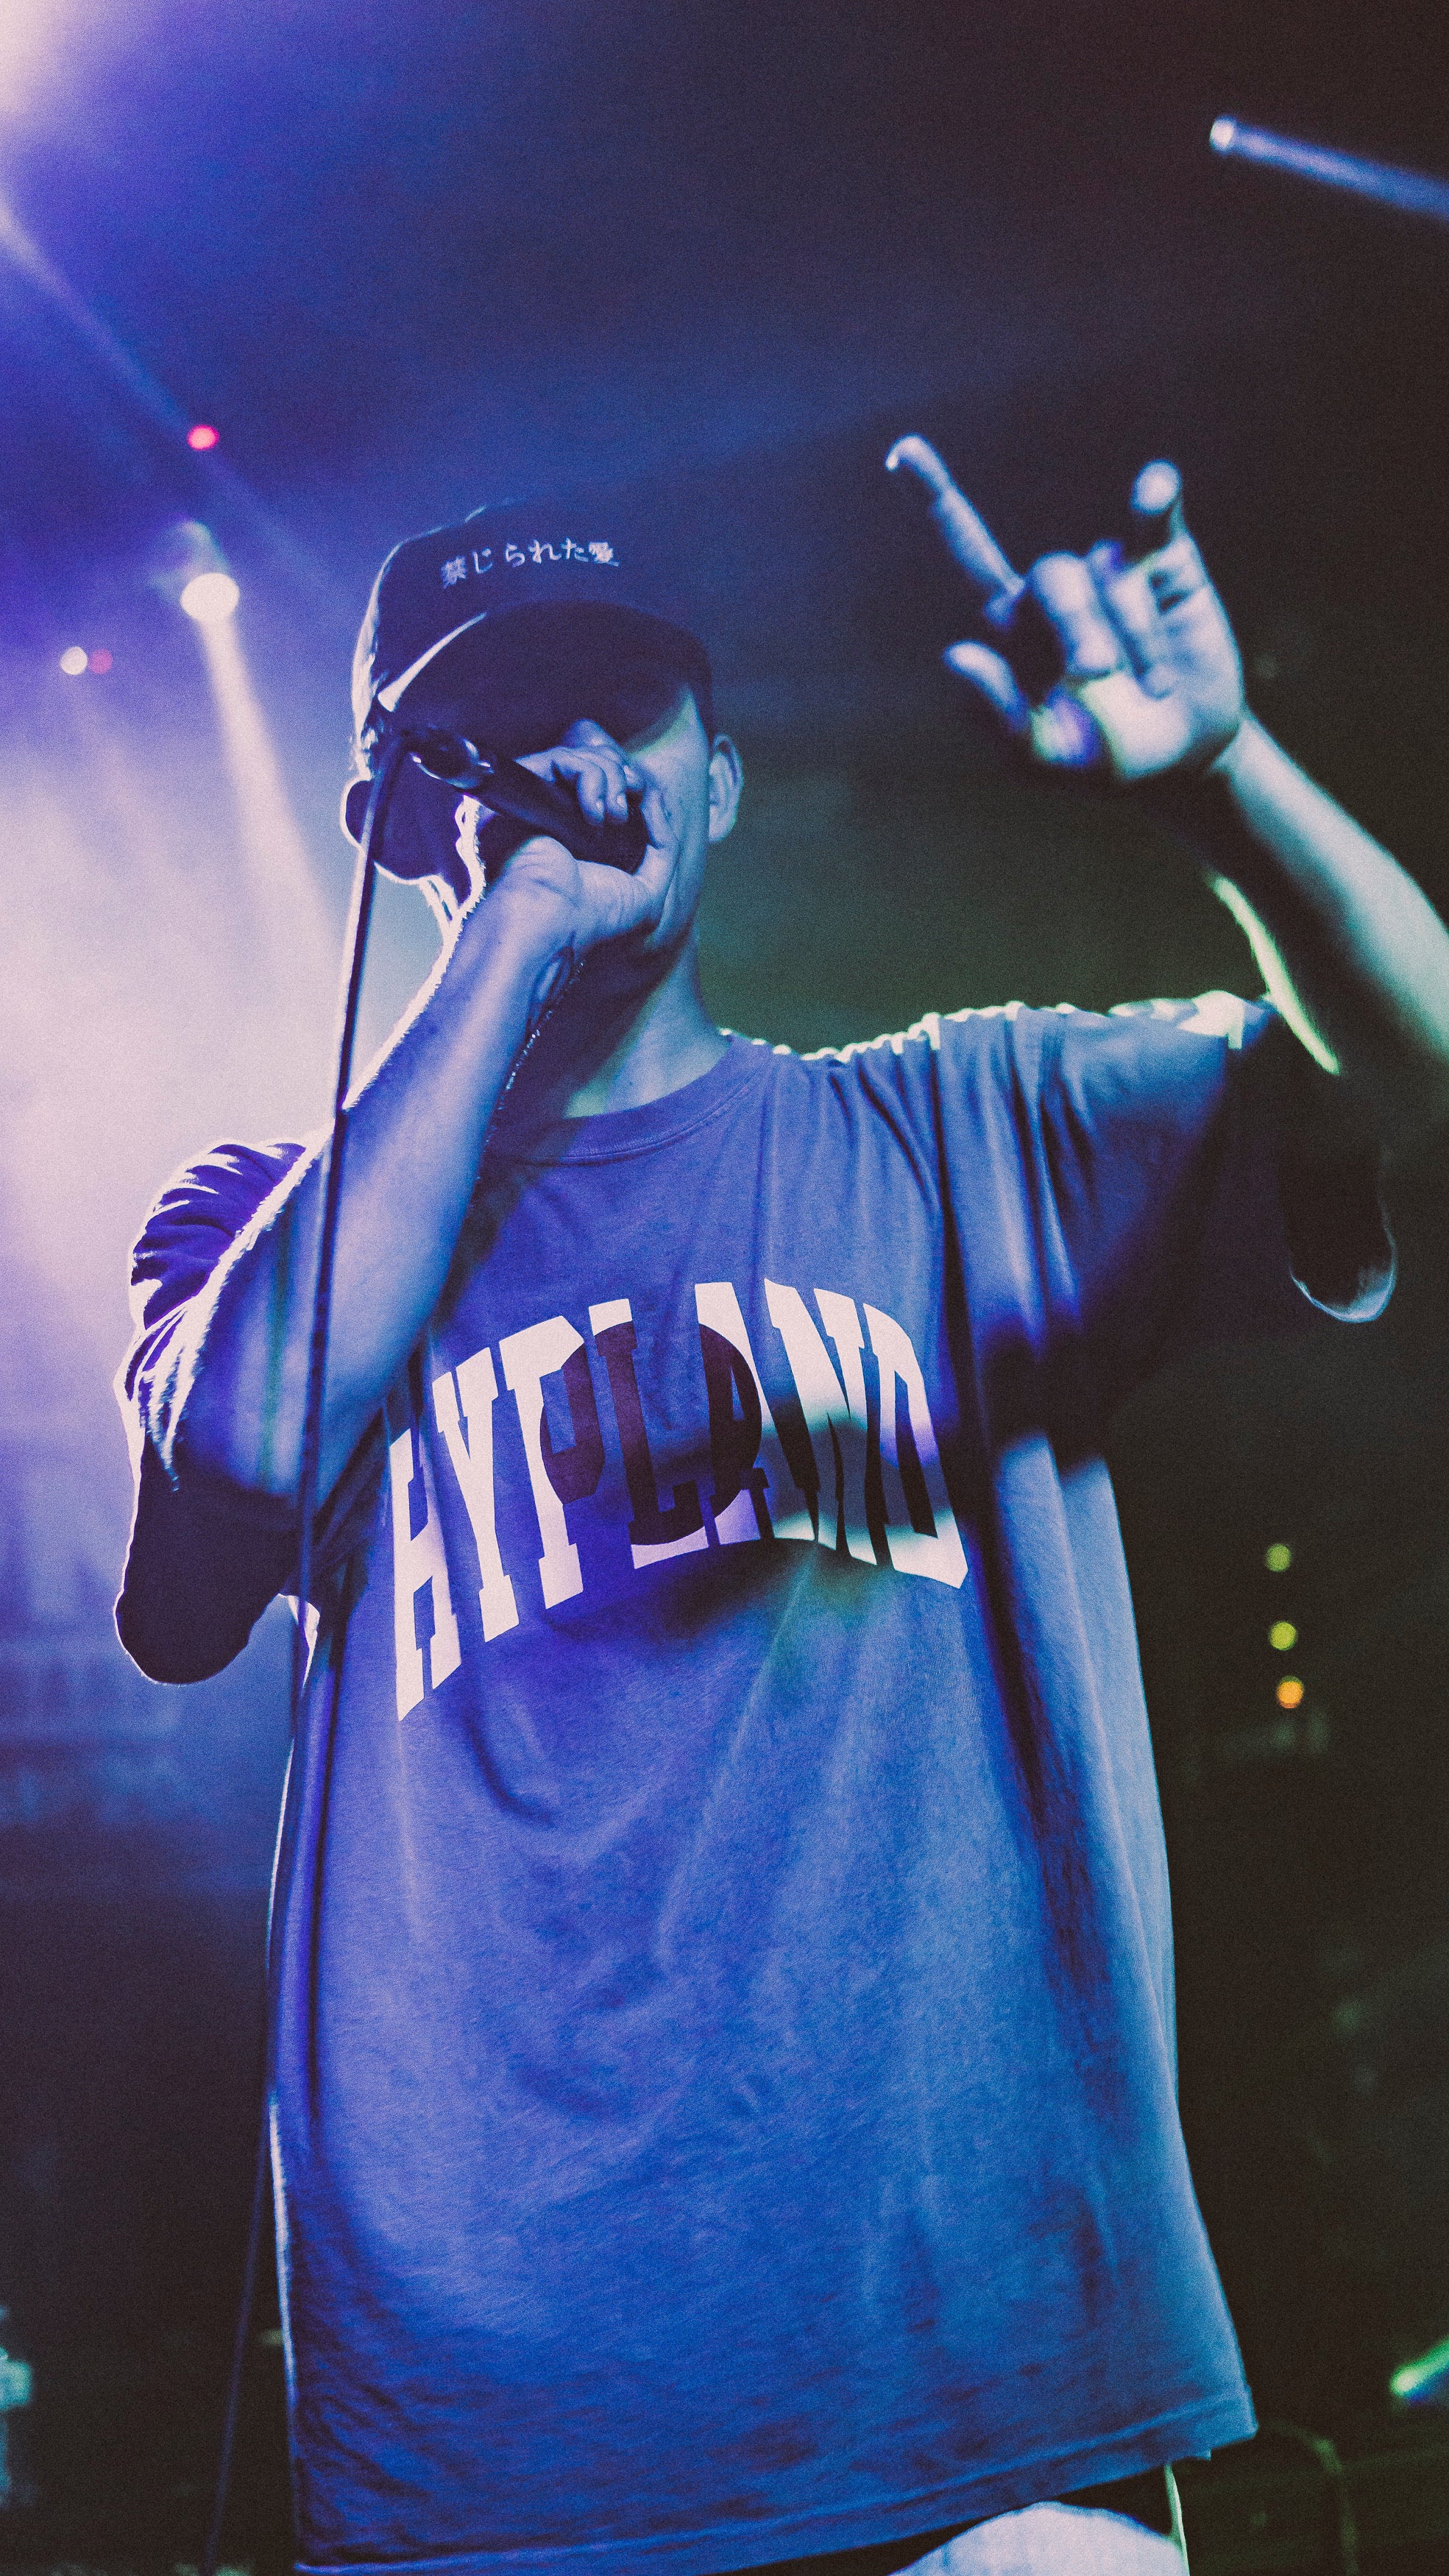 AL-X The Great performing live in San Francisco, California.